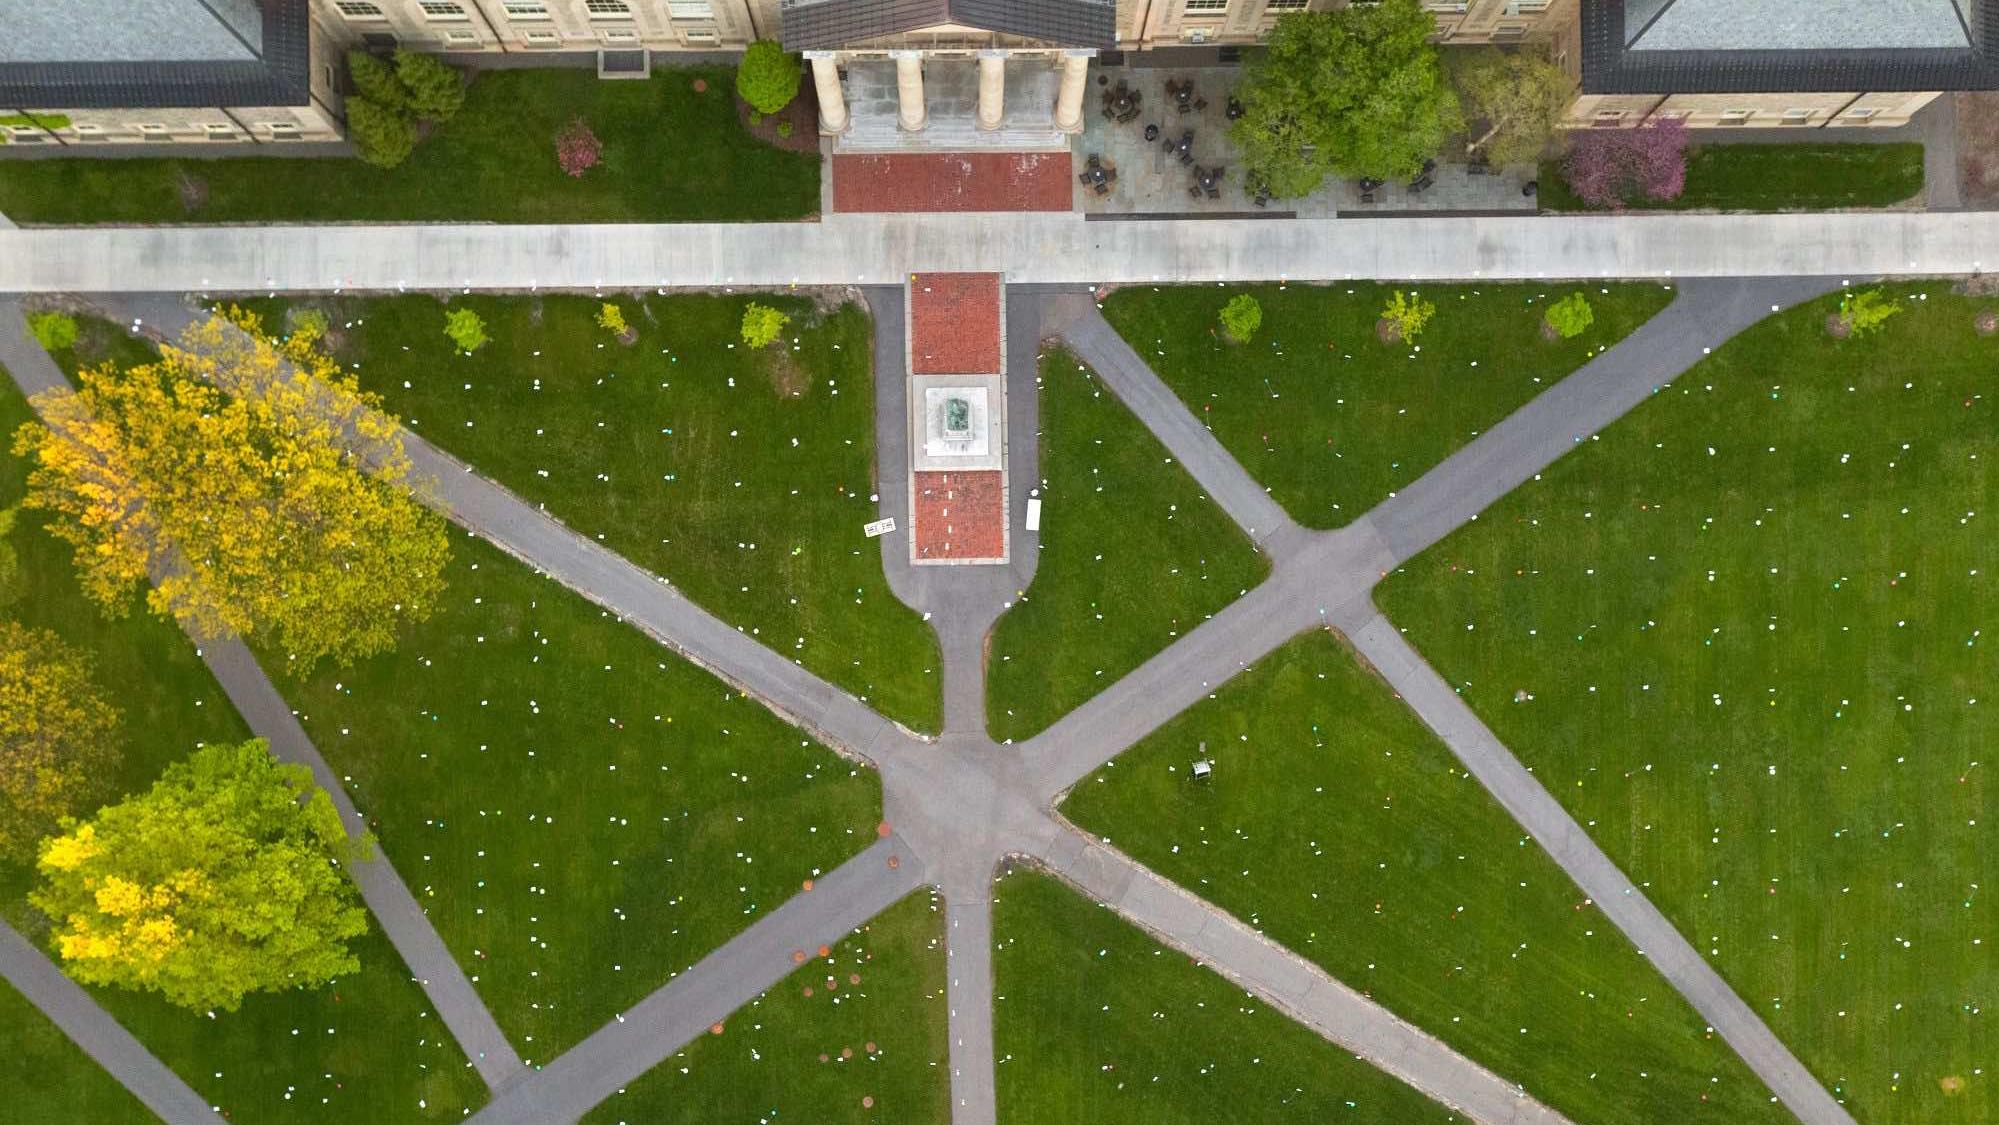 Arial view of quad